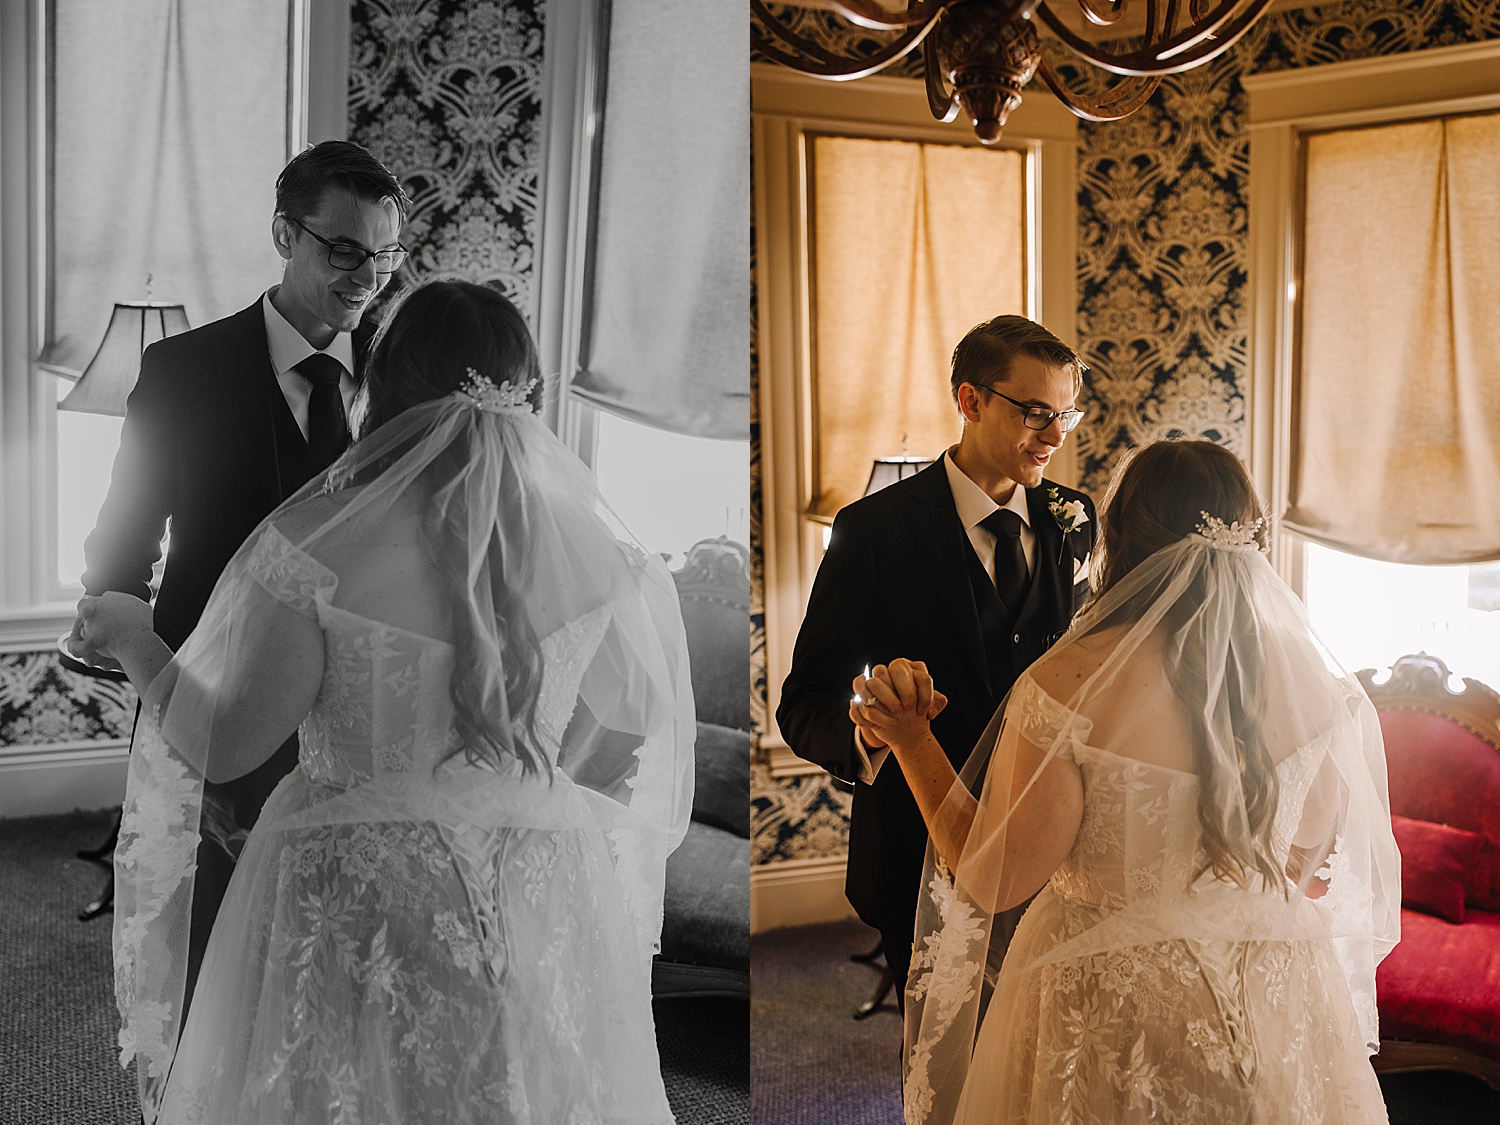 Bride and groom have private first look after getting ready on wedding day